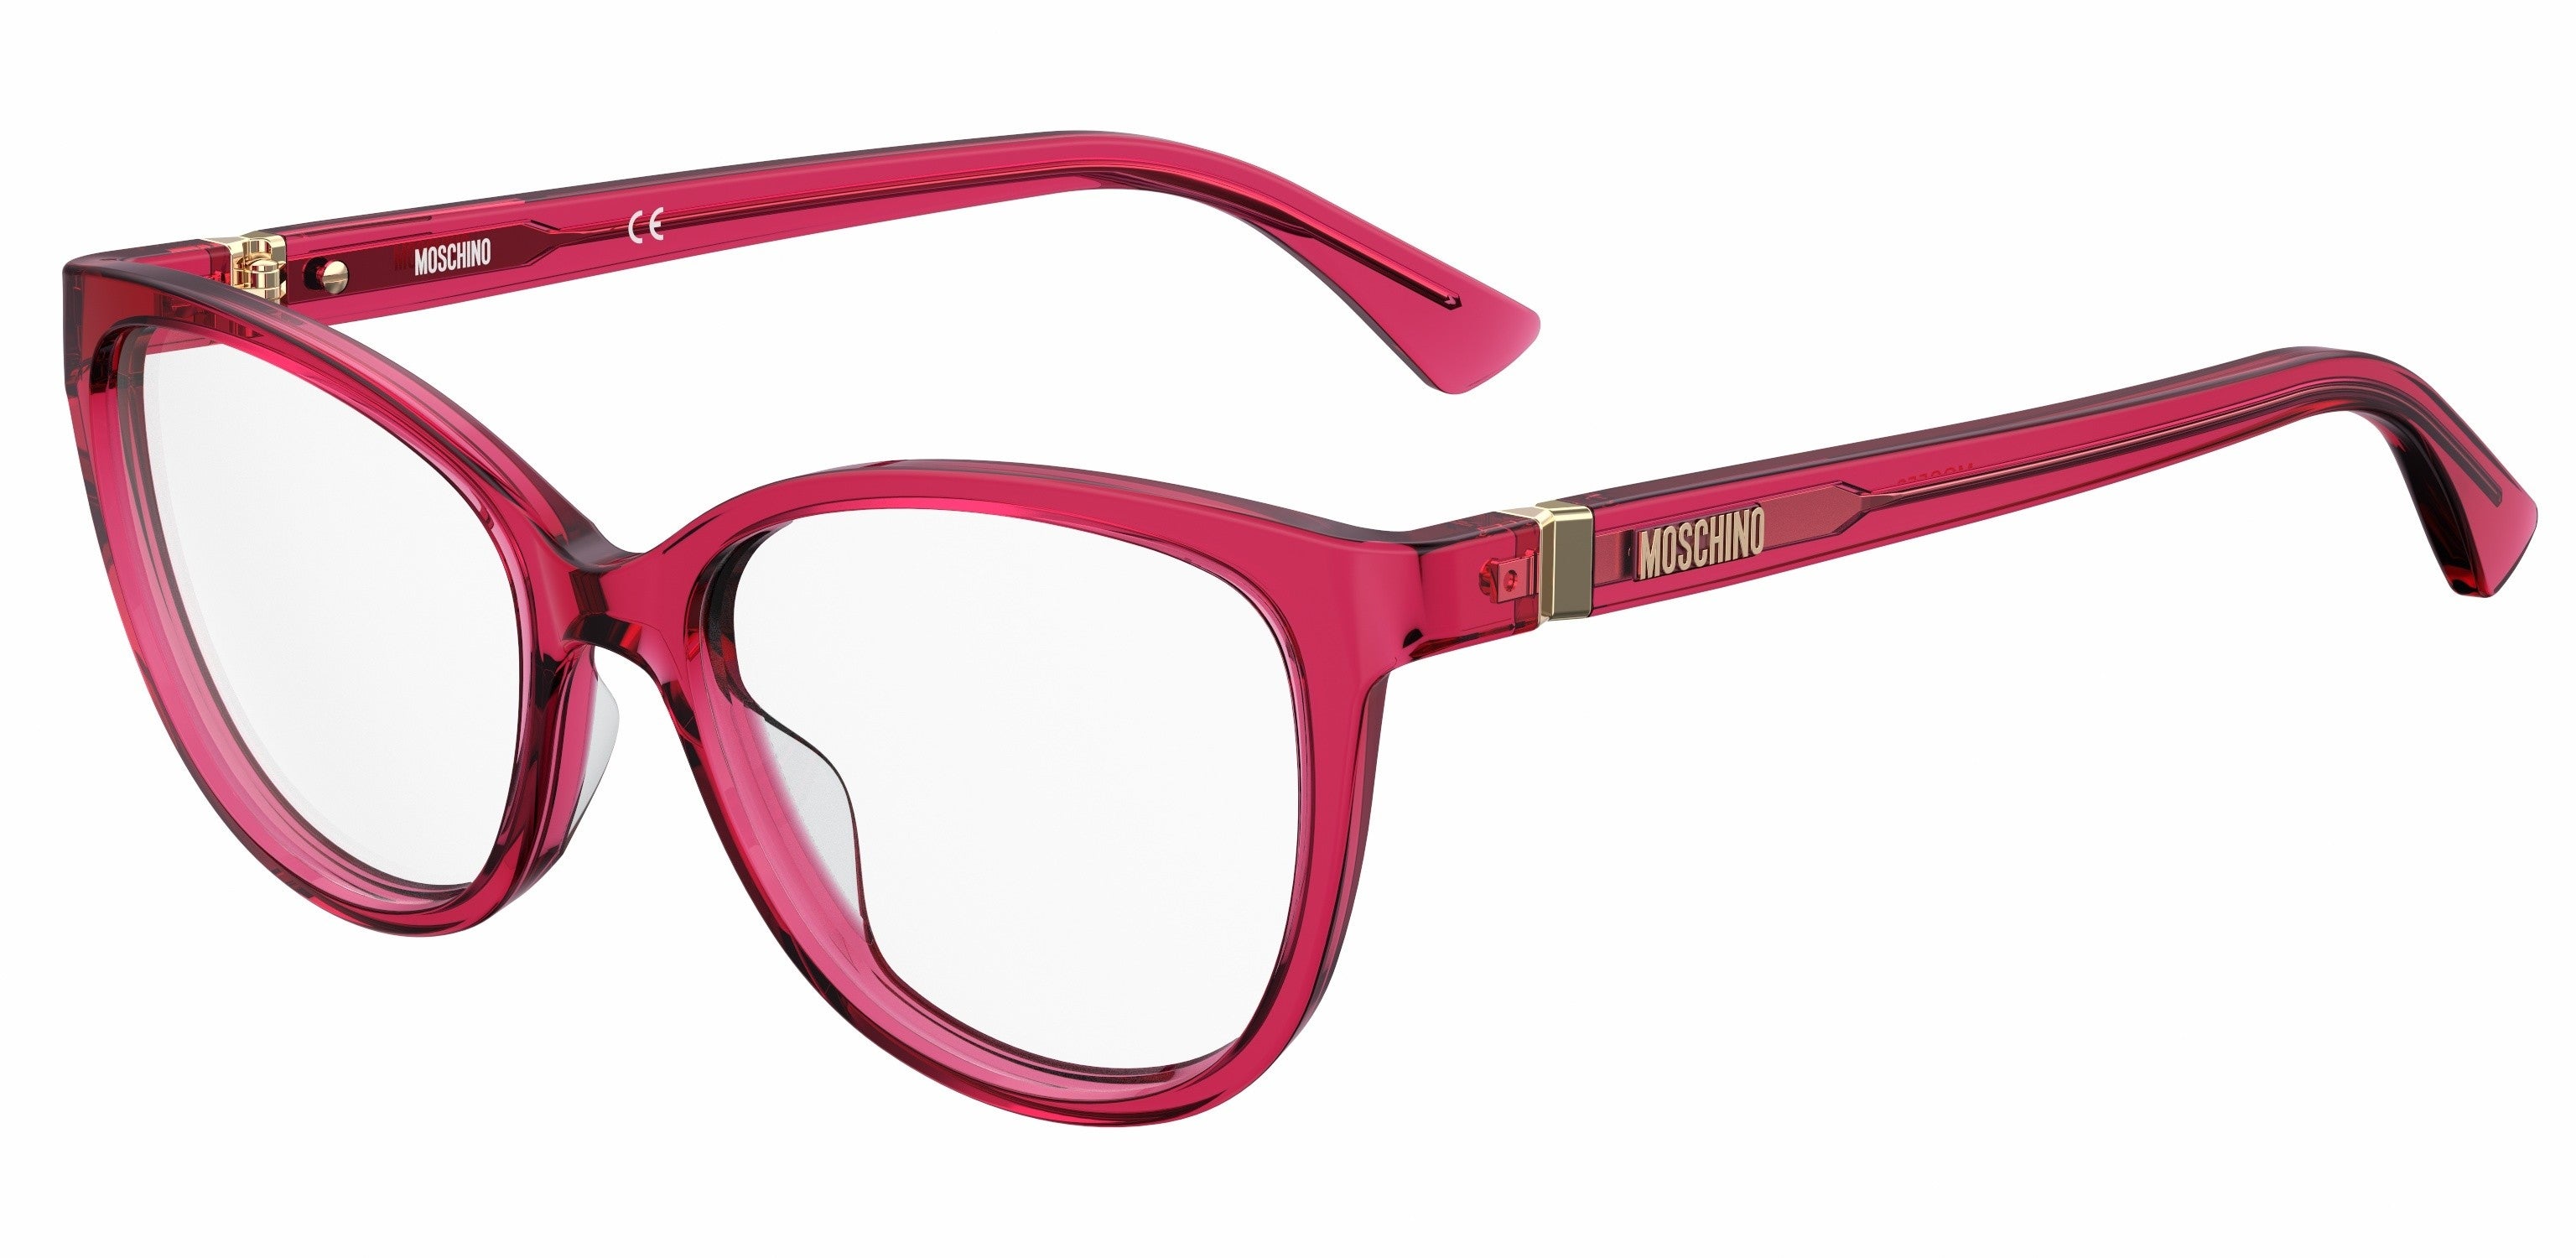  Moschino 559 Cat Eye/butterfly Eyeglasses 0C9A-0C9A  Red (00 Demo Lens)